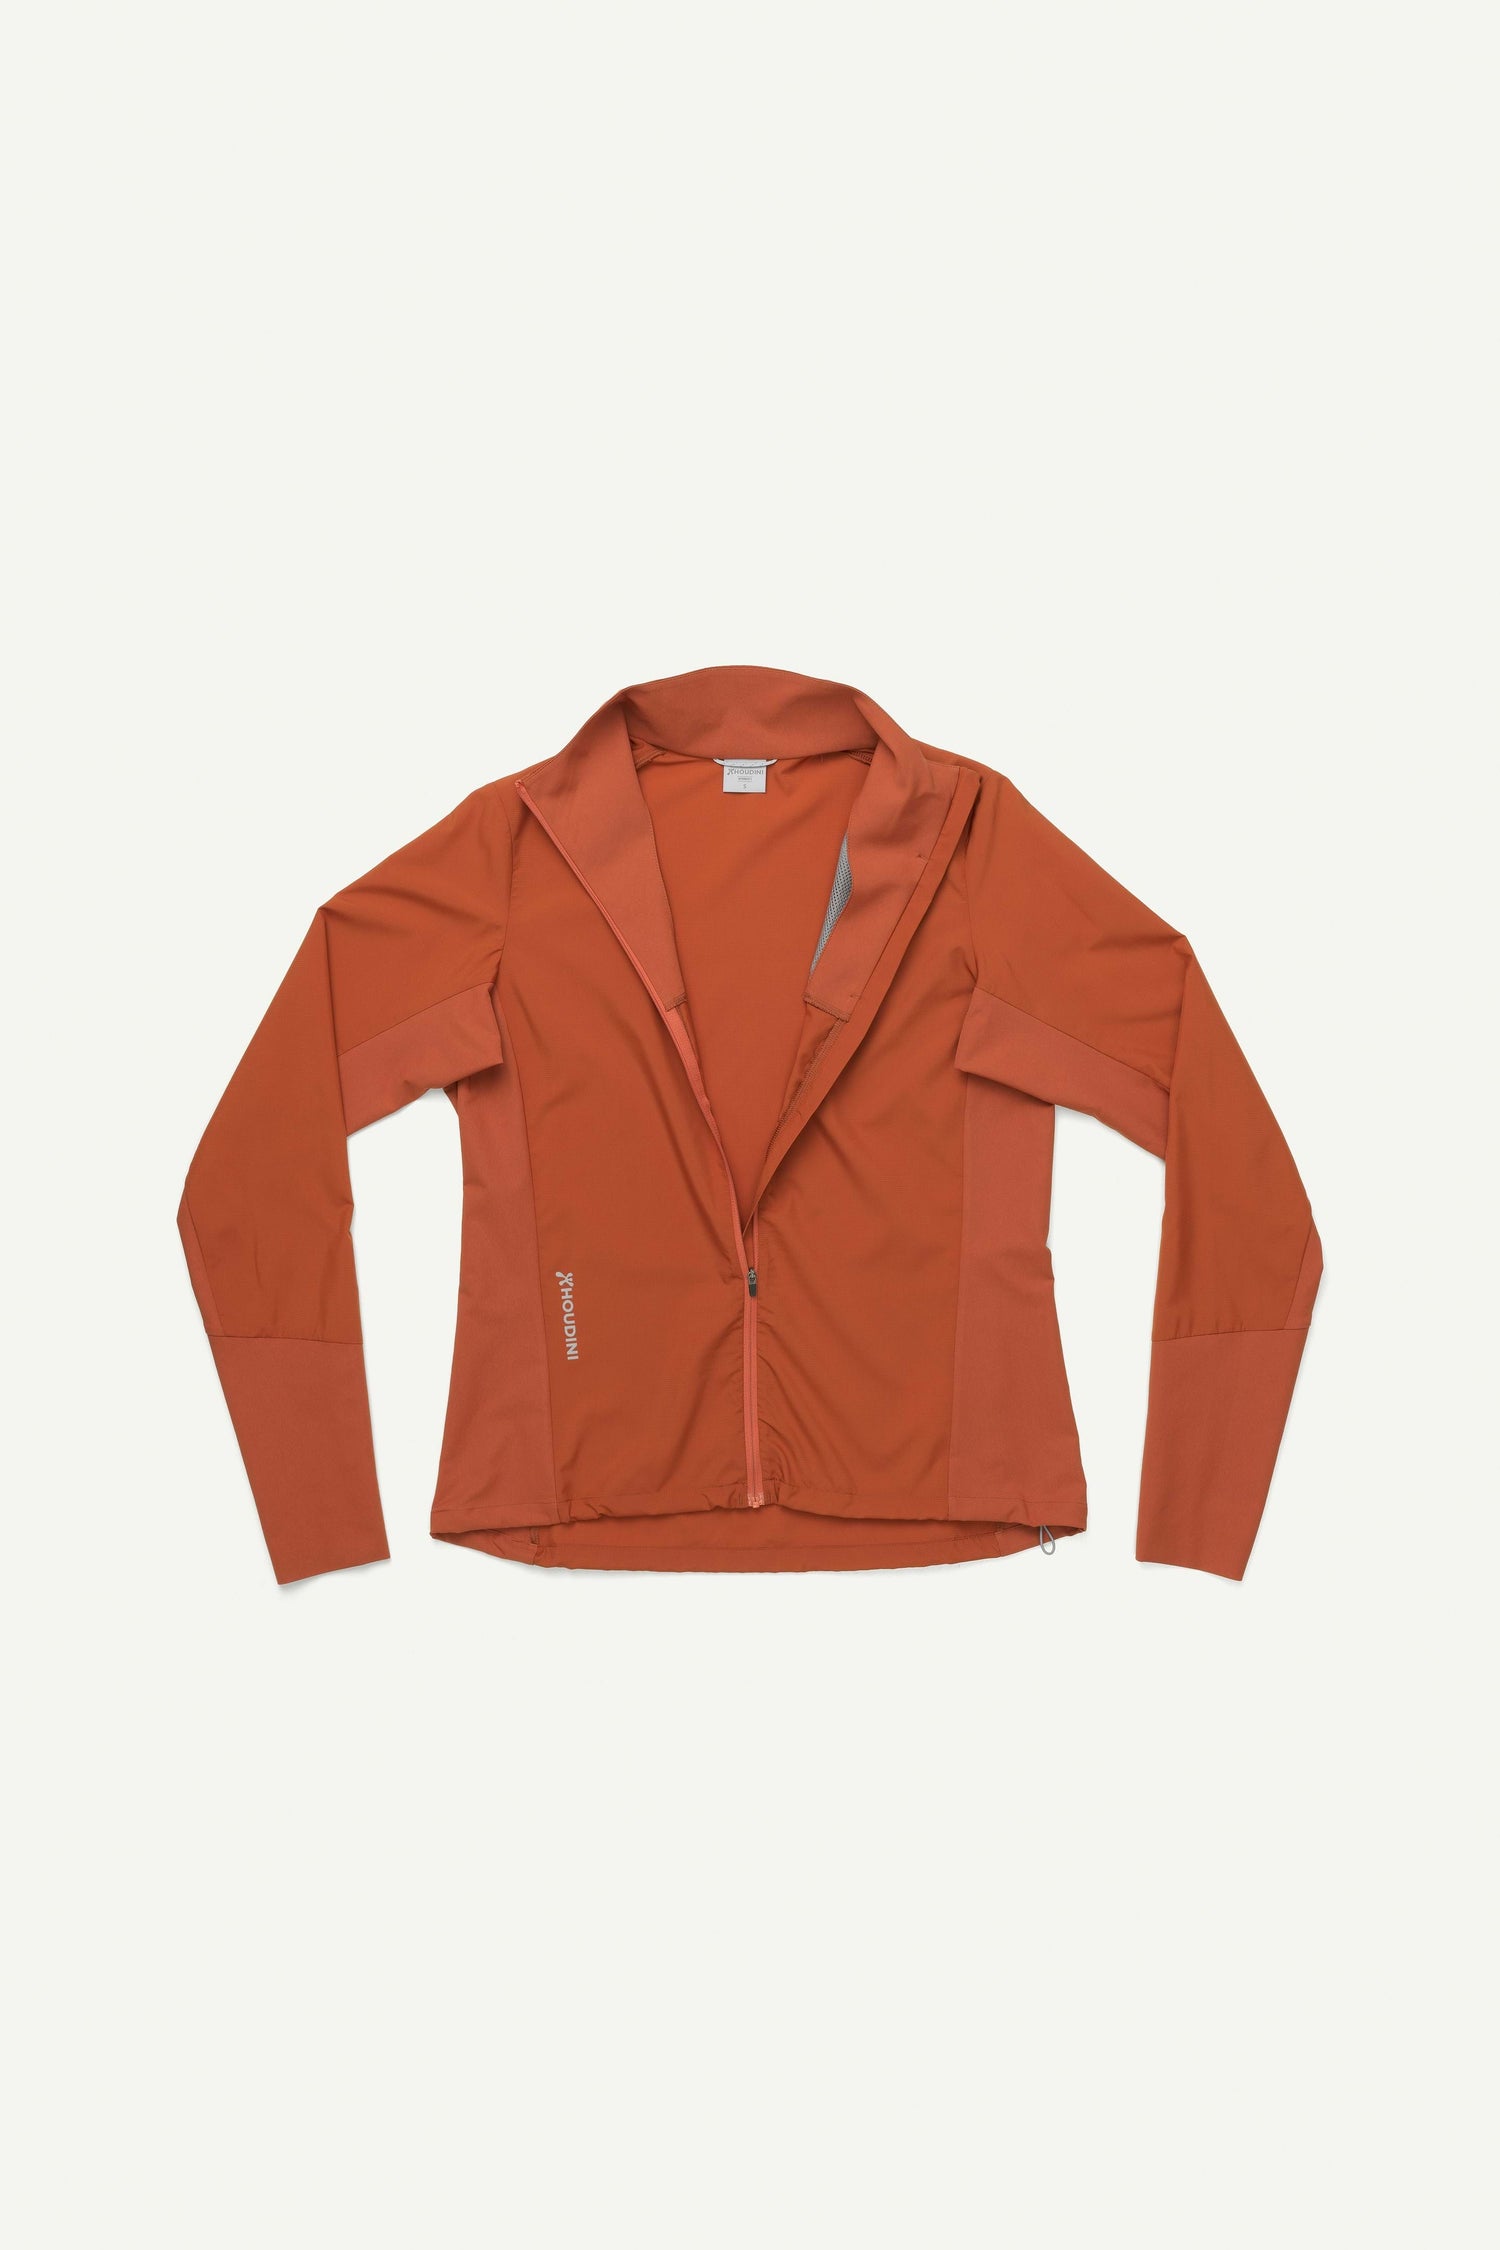 Houdini - W's Pace Wind Jacket - 100% recycled polyester - Weekendbee - sustainable sportswear